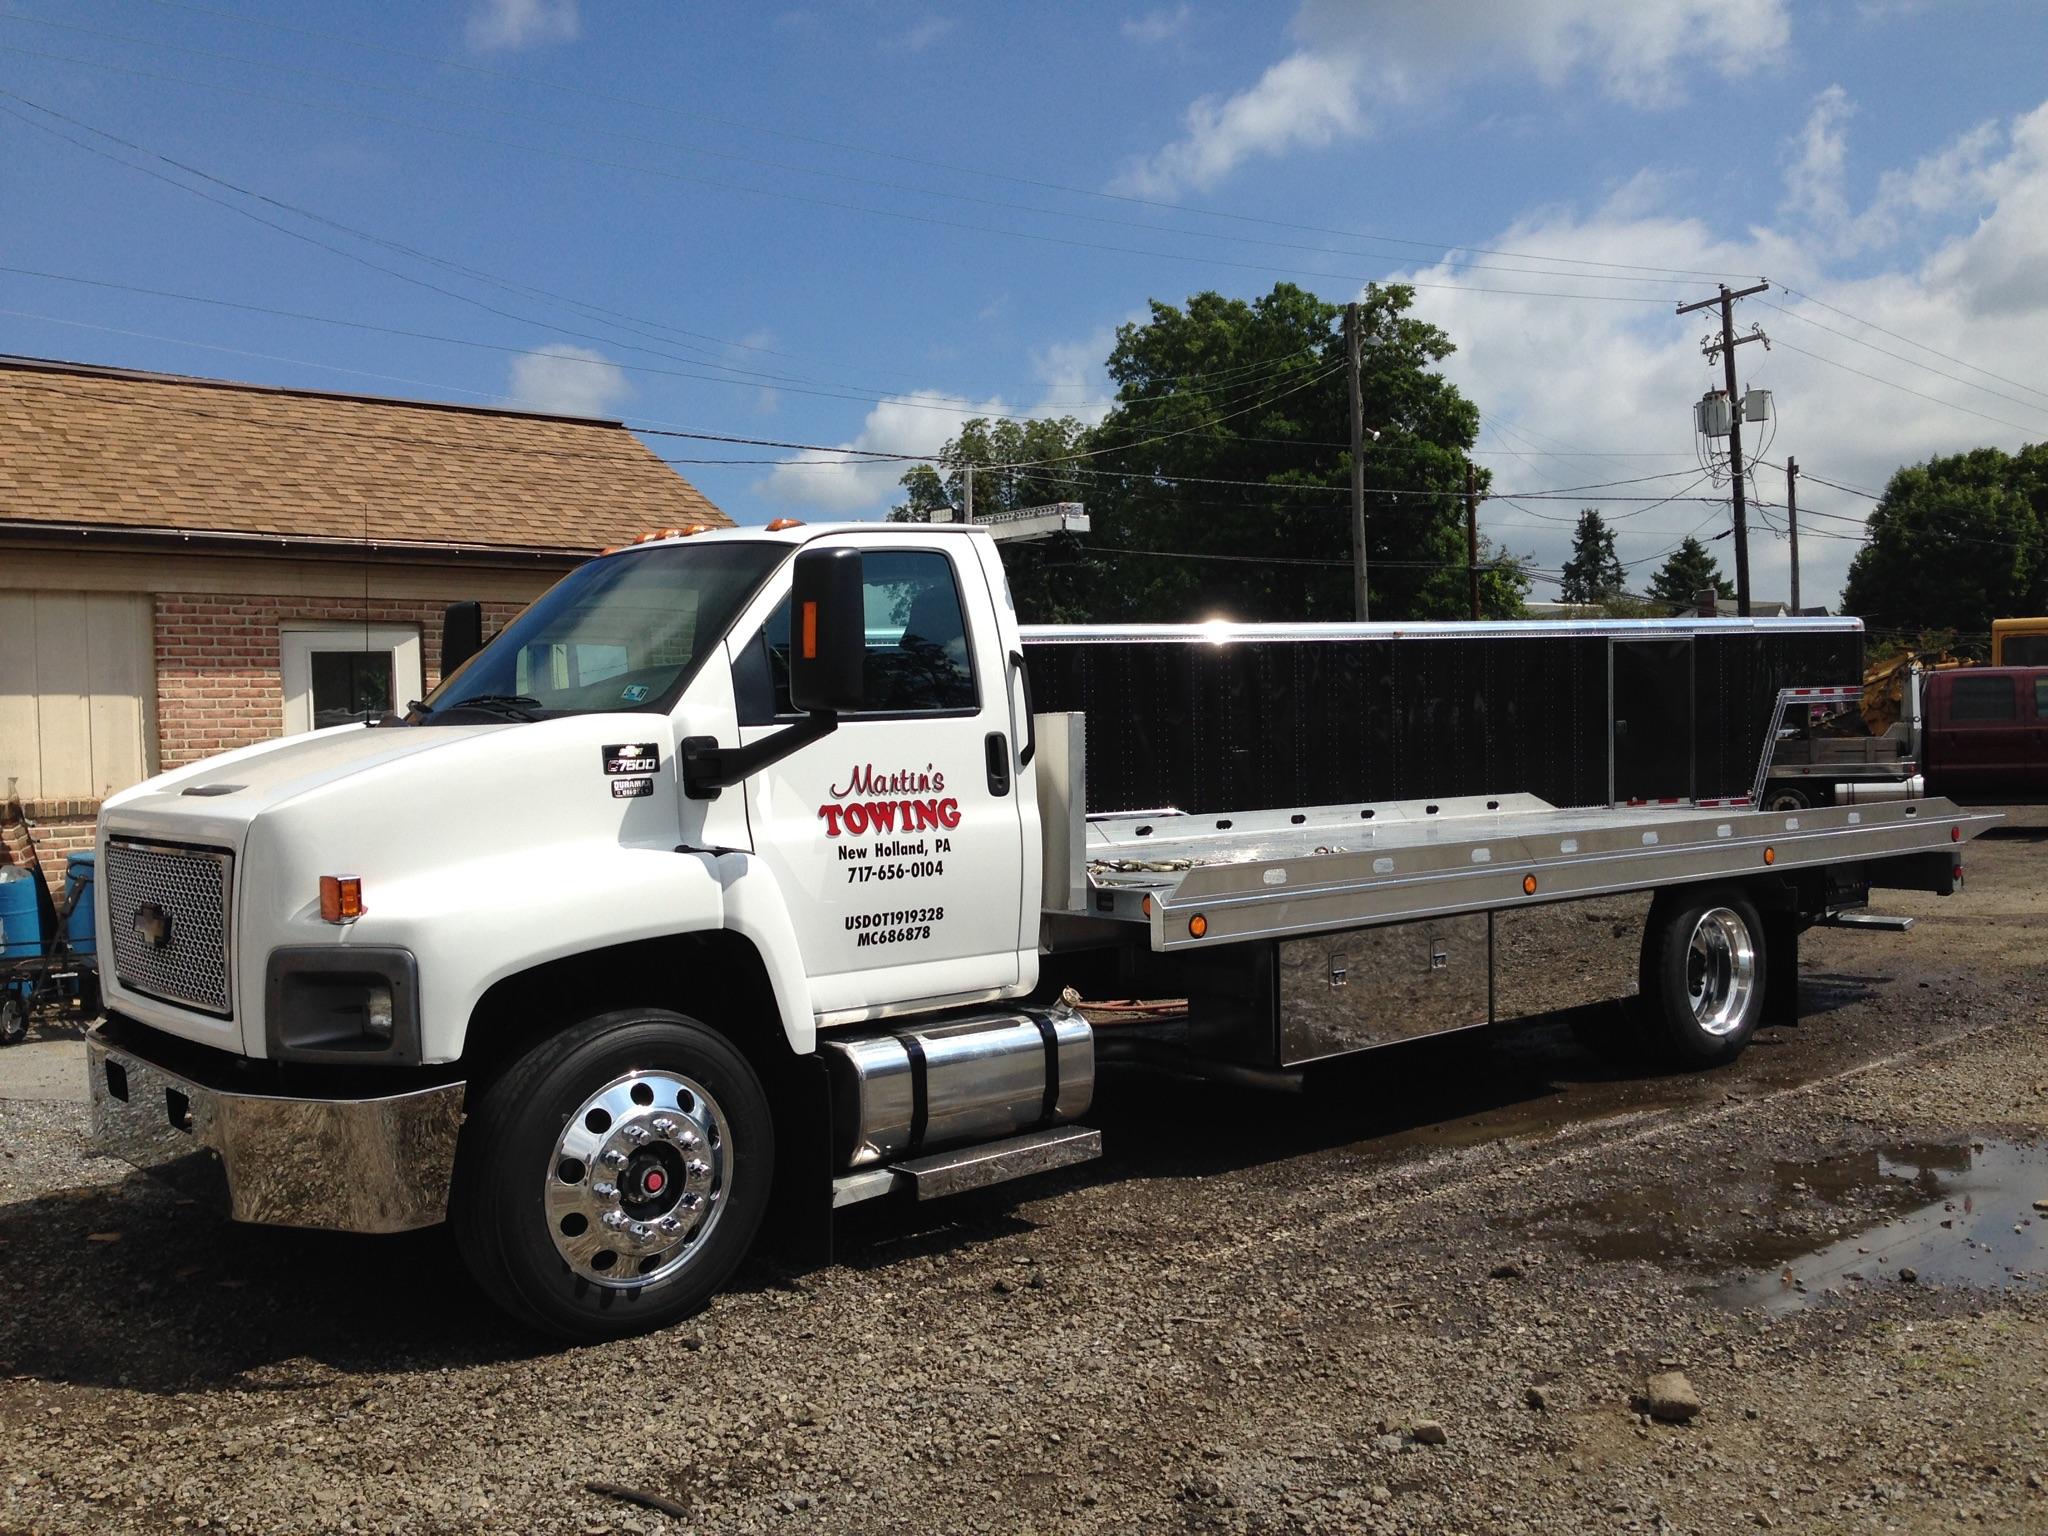 Martin's Towing | New Holland, PA | (717) 656-0104